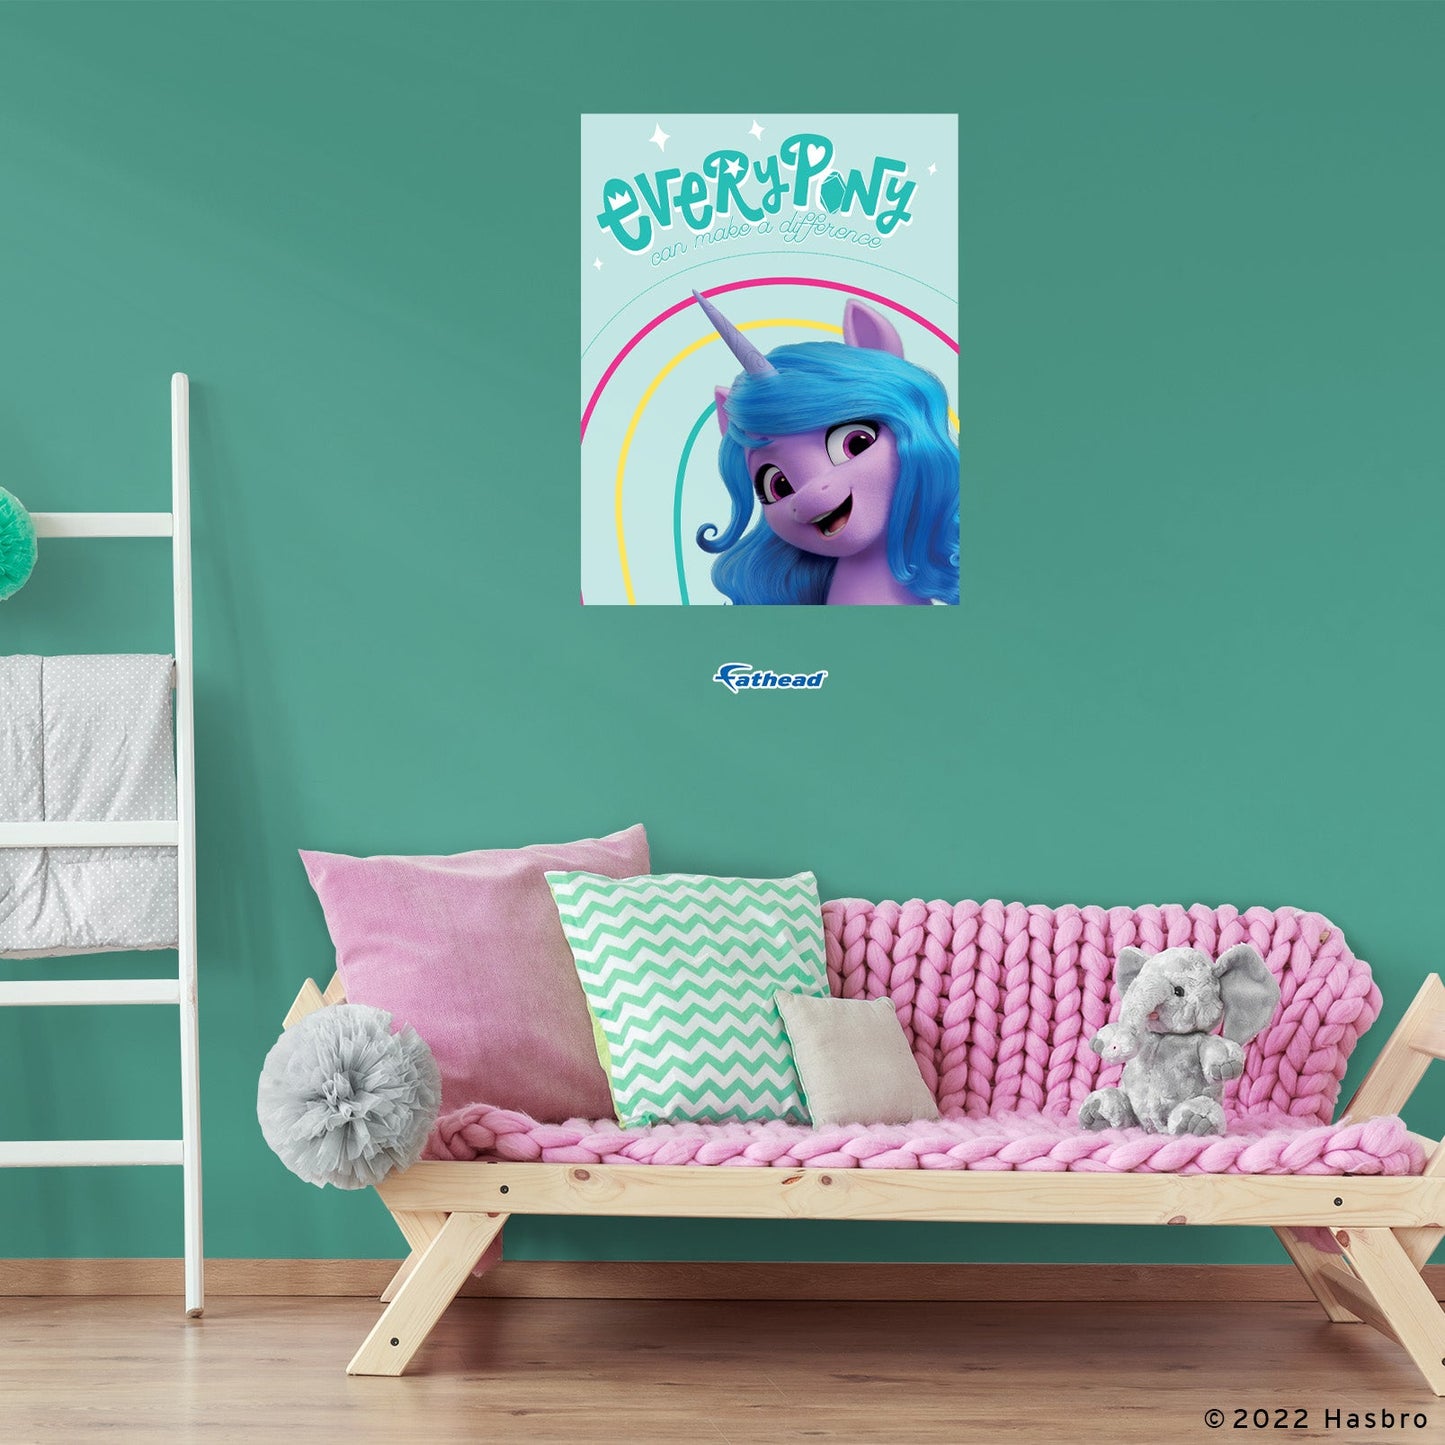 My Little Pony Movie 2: Every Pony Can Make A Difference Poster - Officially Licensed Hasbro Removable Adhesive Decal